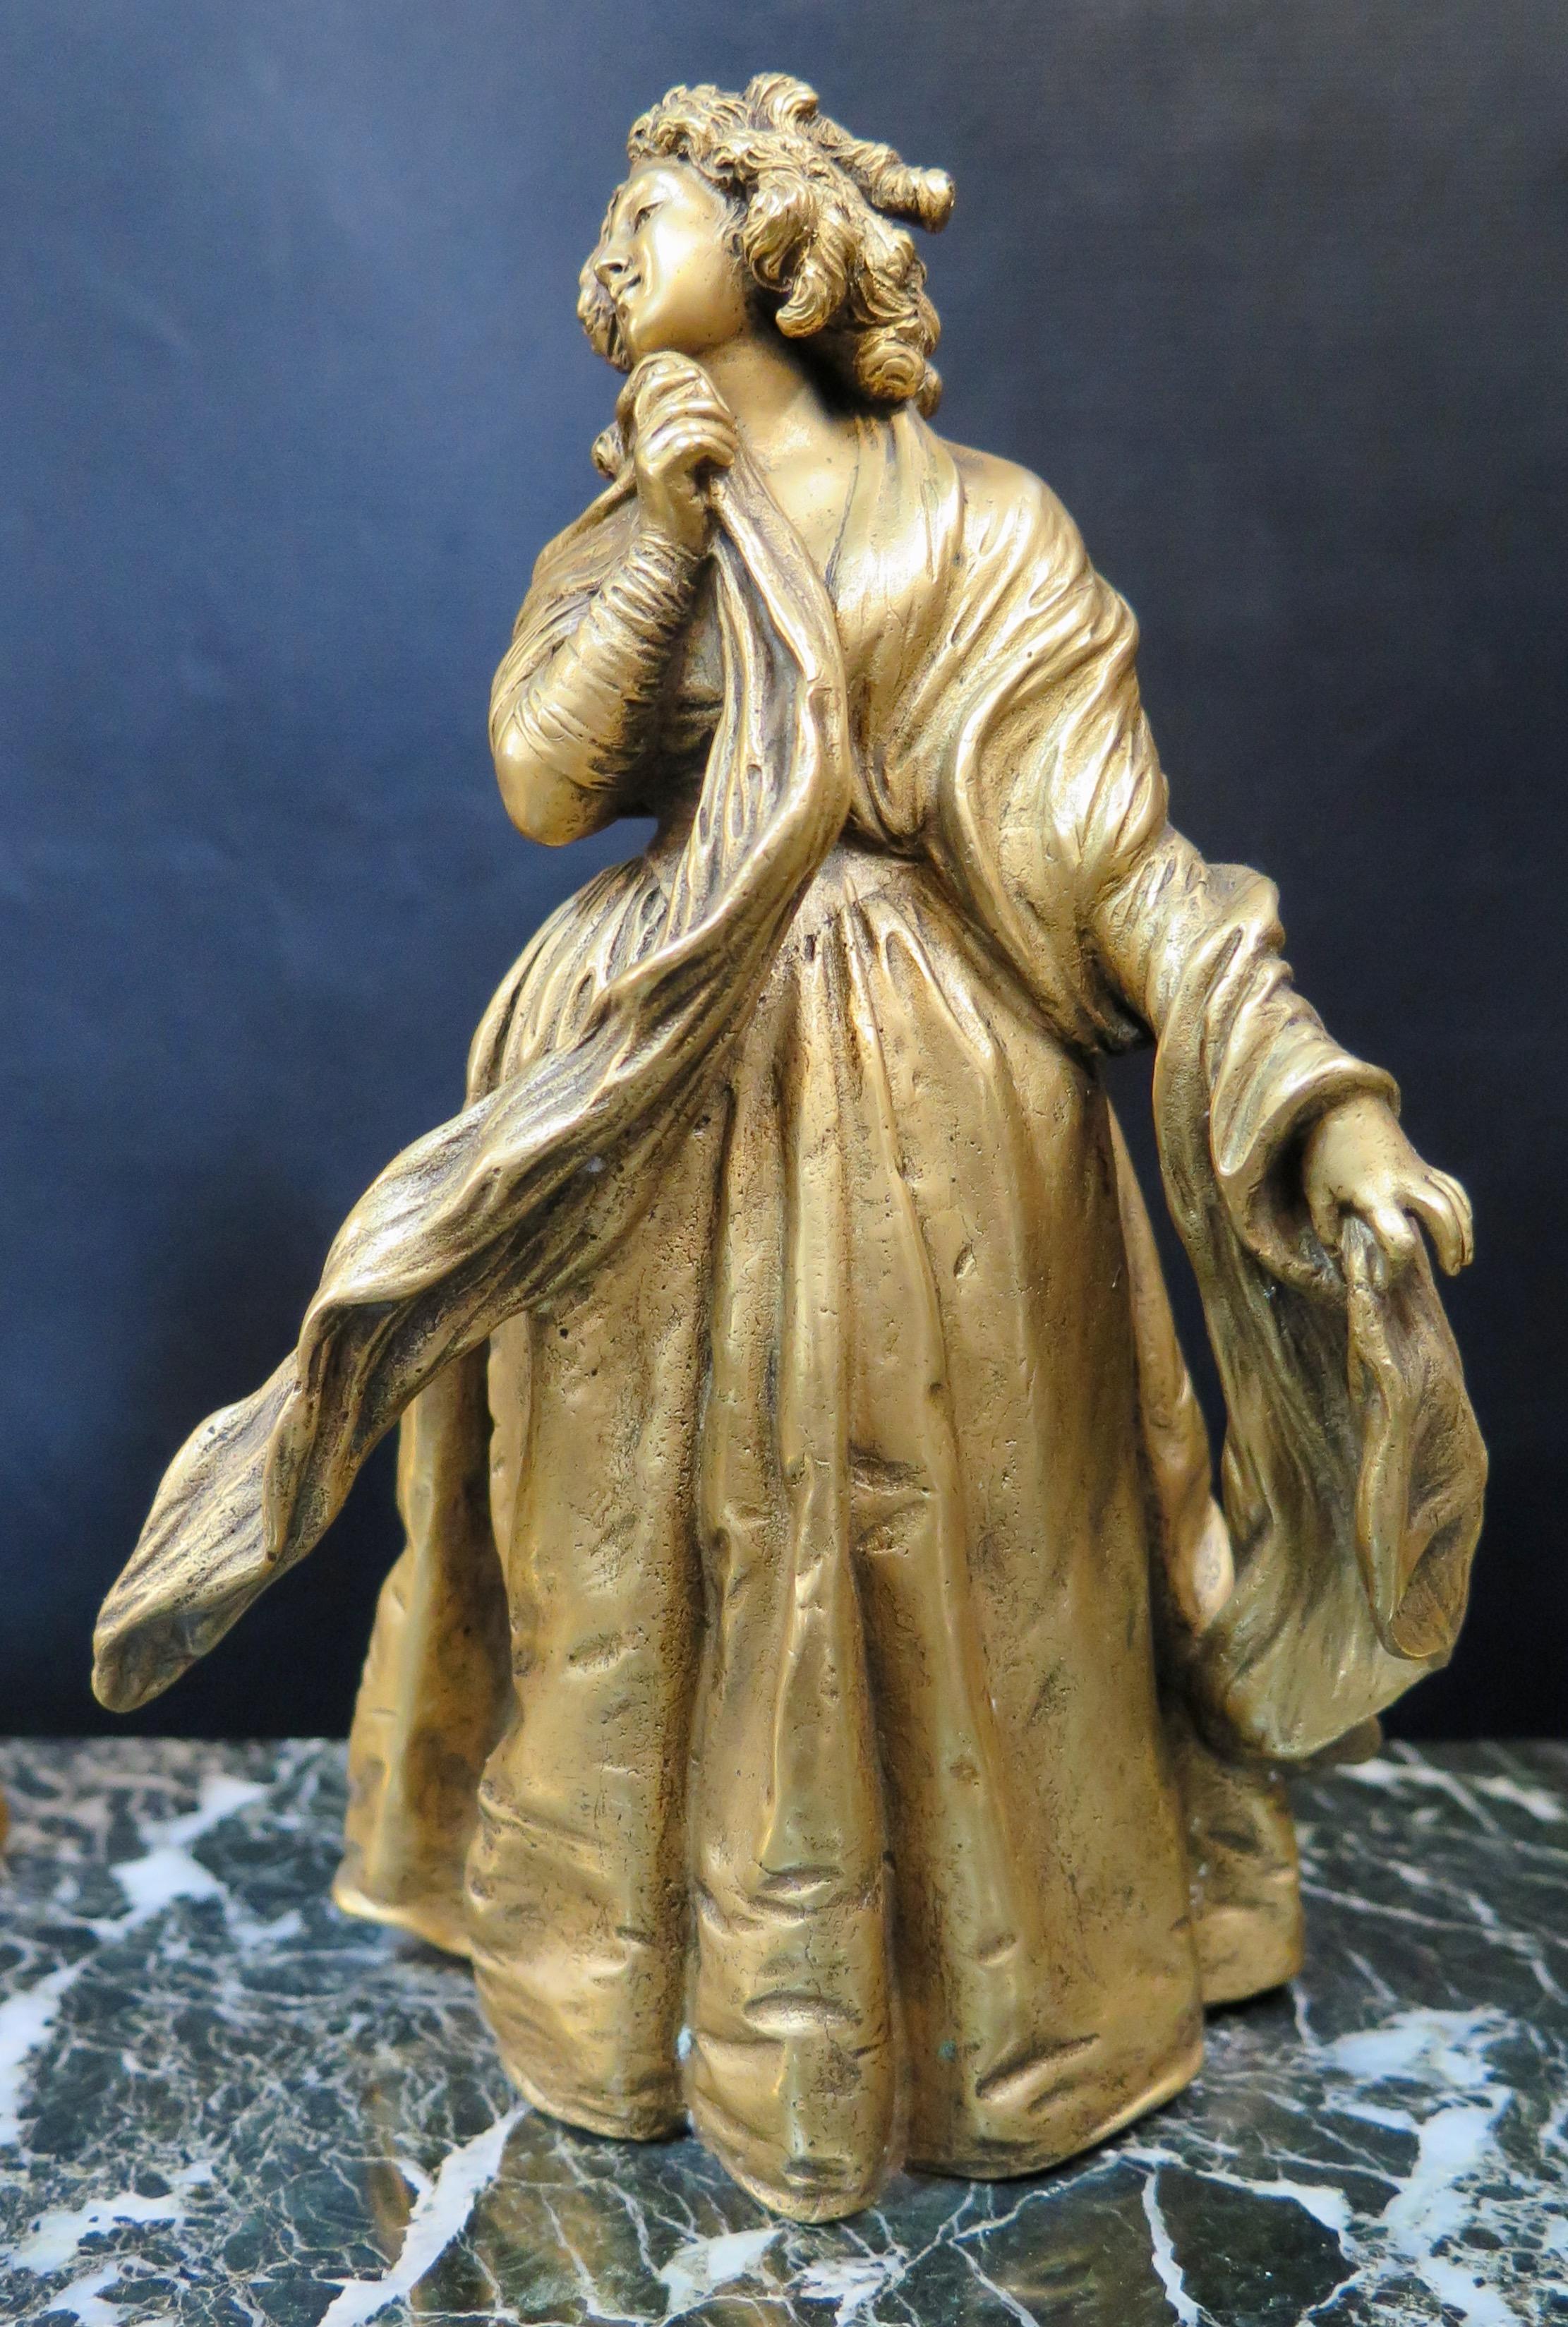 This vintage 19th century inkwell is beautifully designed with a detailed sculpted doré' bronze reminiscent the poet, Elizabeth Barrett Browning. The figure is costumed in a draped gown & holding a long flowing shawl around her. Two decorative